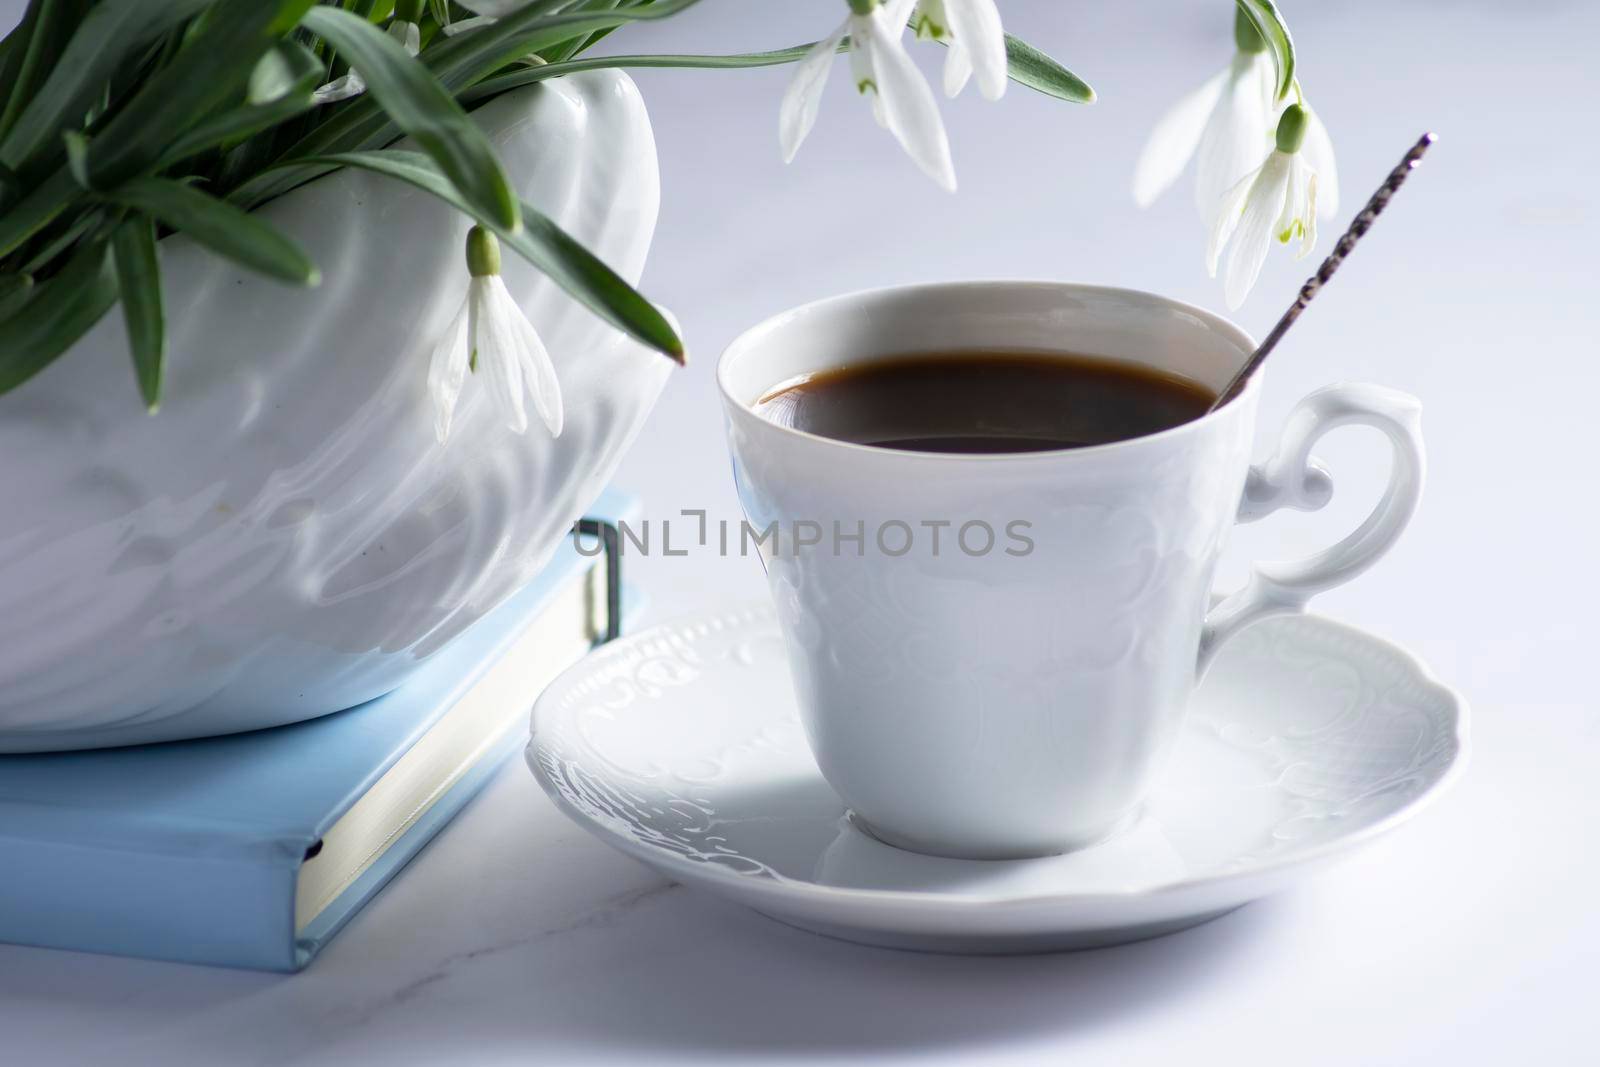 Still life with snowdrops in a ceramic vase like a swan, coffee in a white cup by KaterinaDalemans